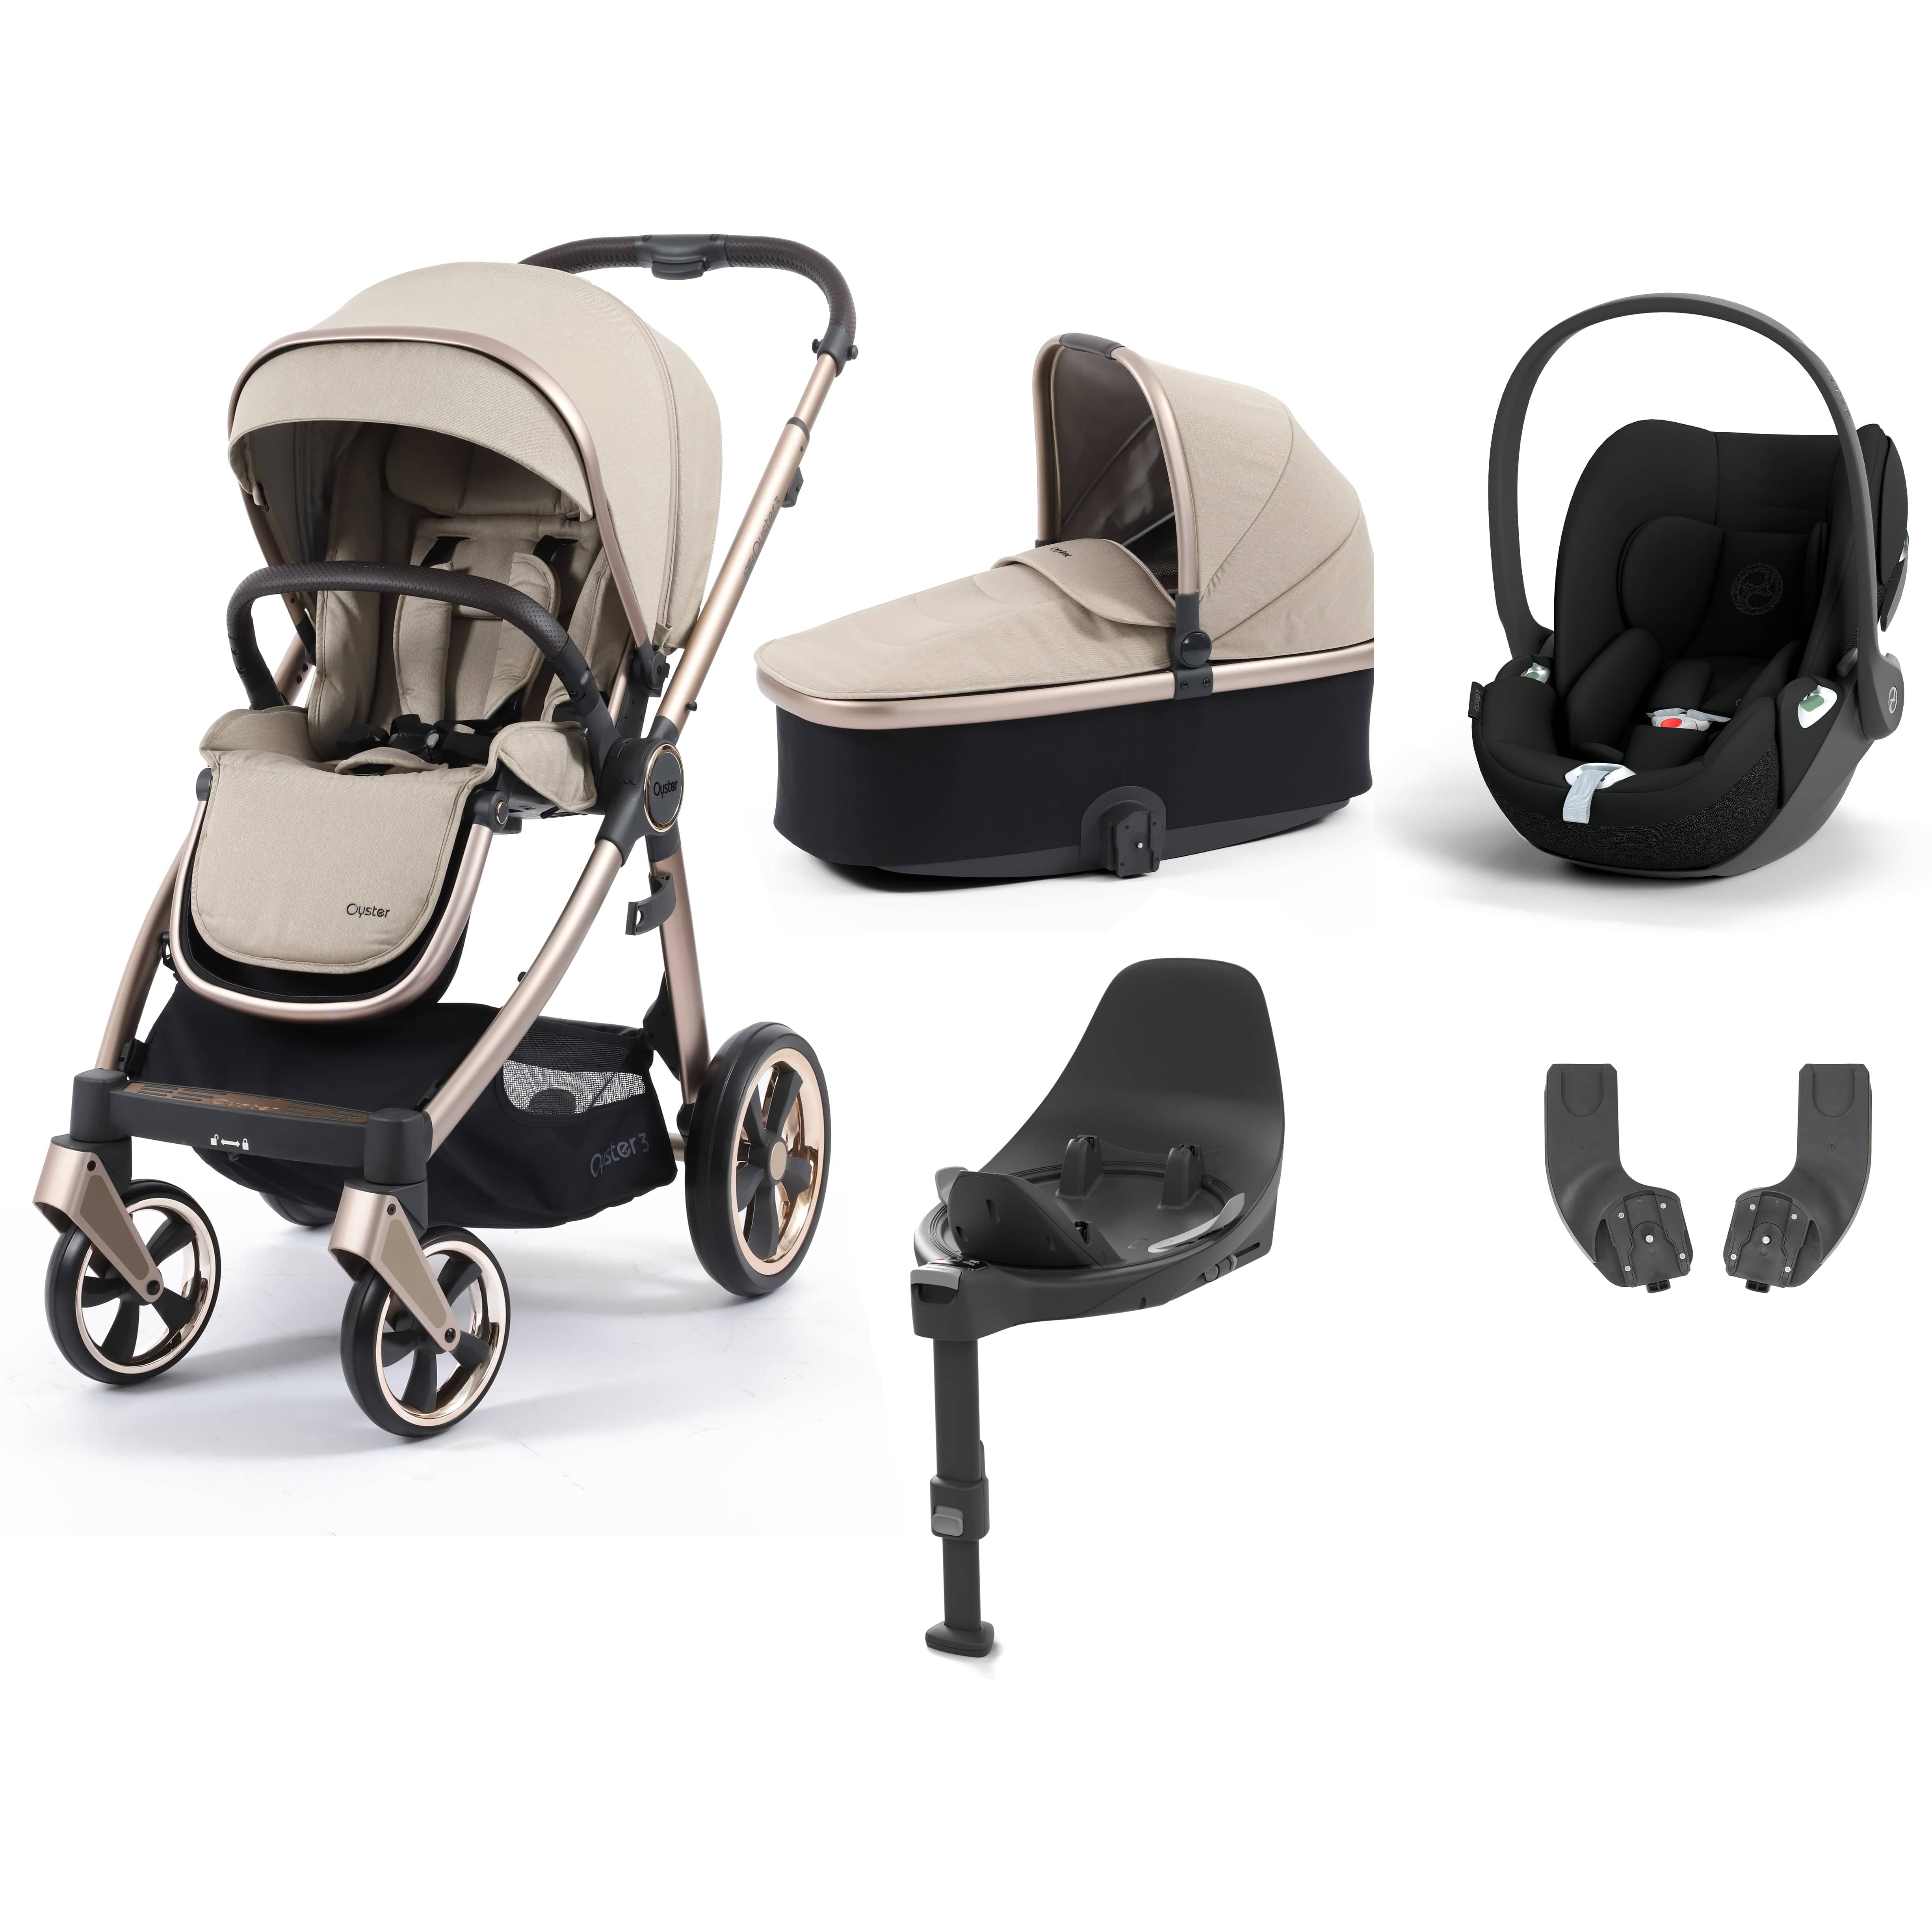 Babystyle Oyster 3 Essential Bundle with Car Seat in Creme Brulee Travel Systems 14748-CMB 5060711567235